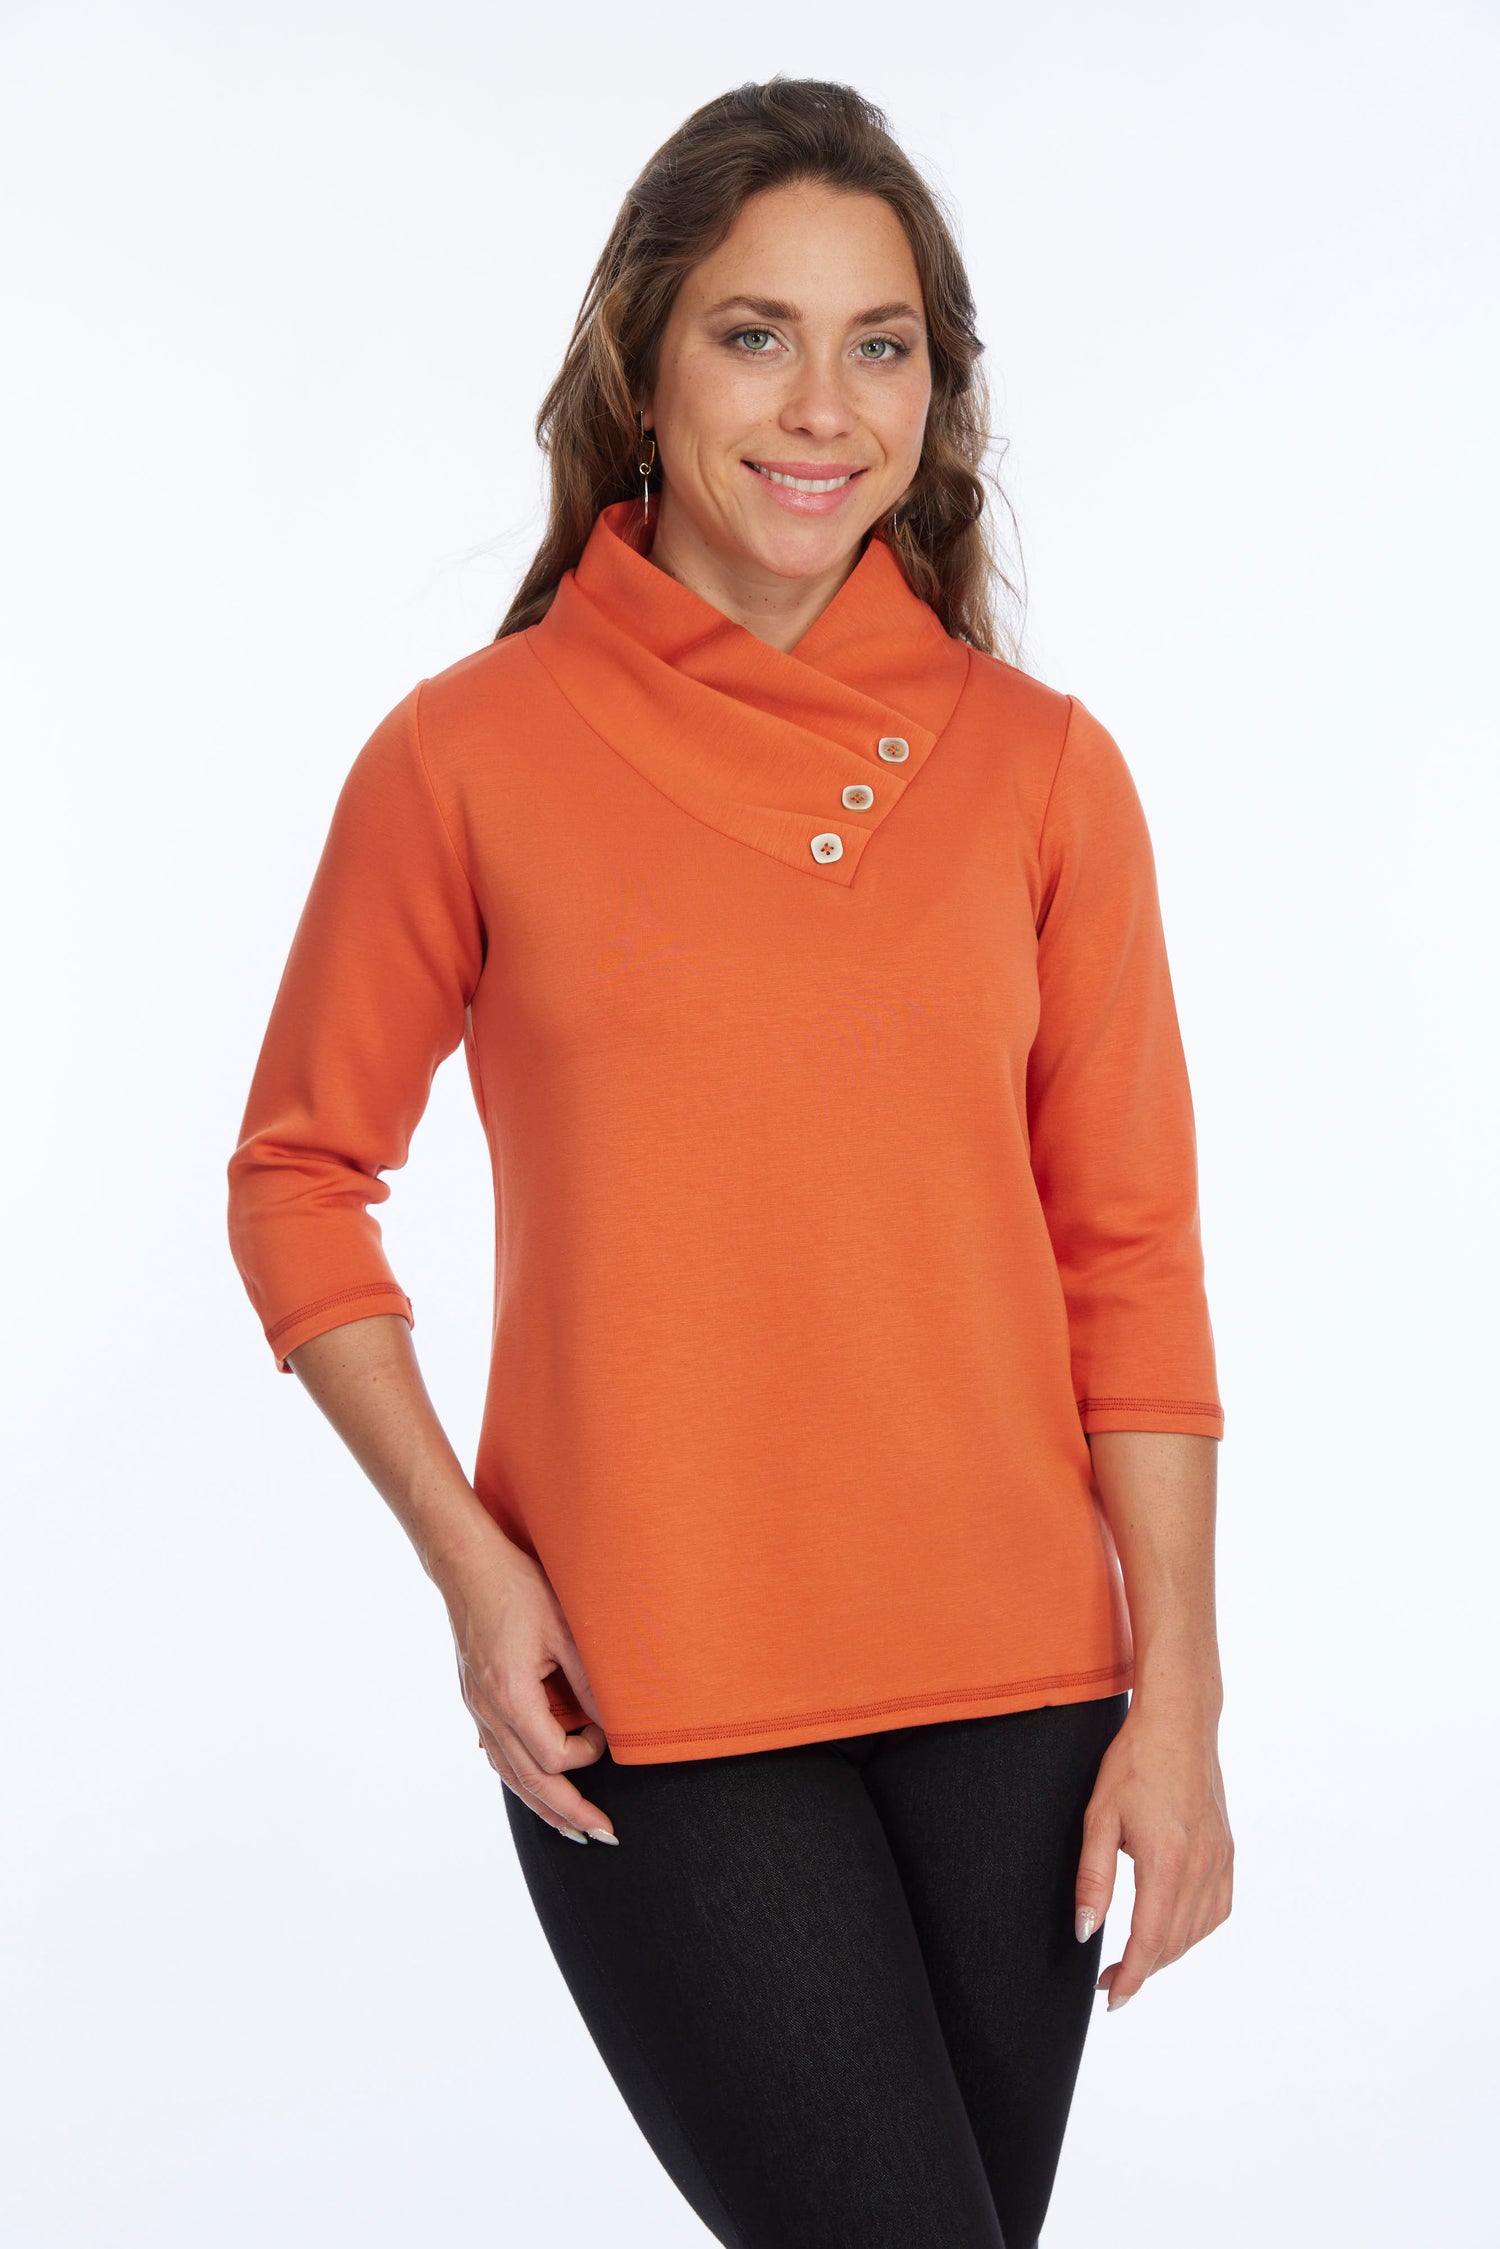 soft knit top with gathered neckline